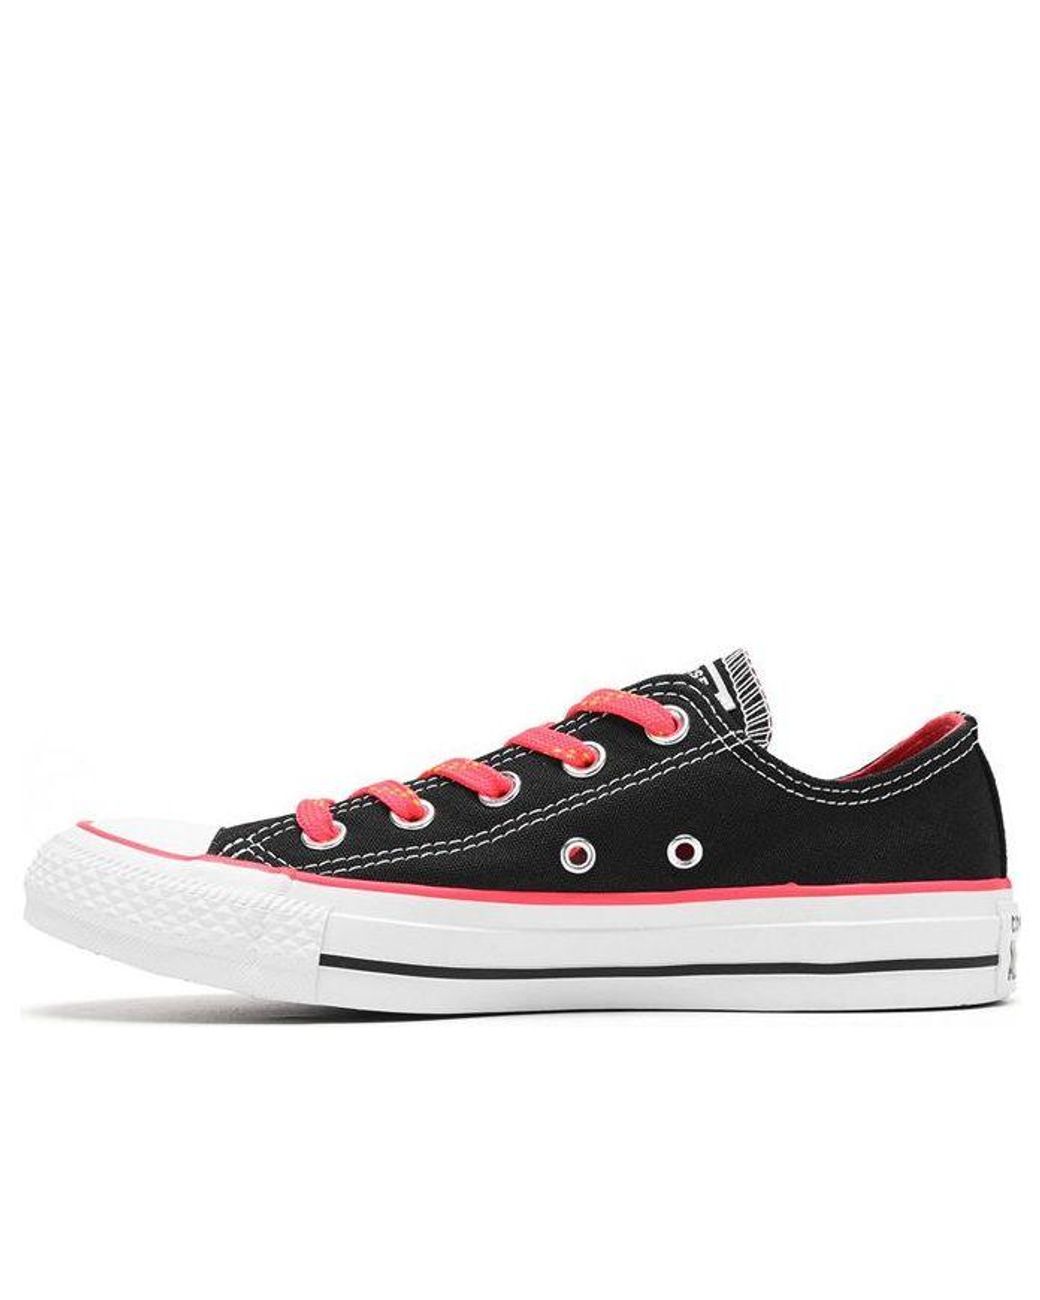 Converse All Star Ctas Ox Sneakers Pink/black in White | Lyst